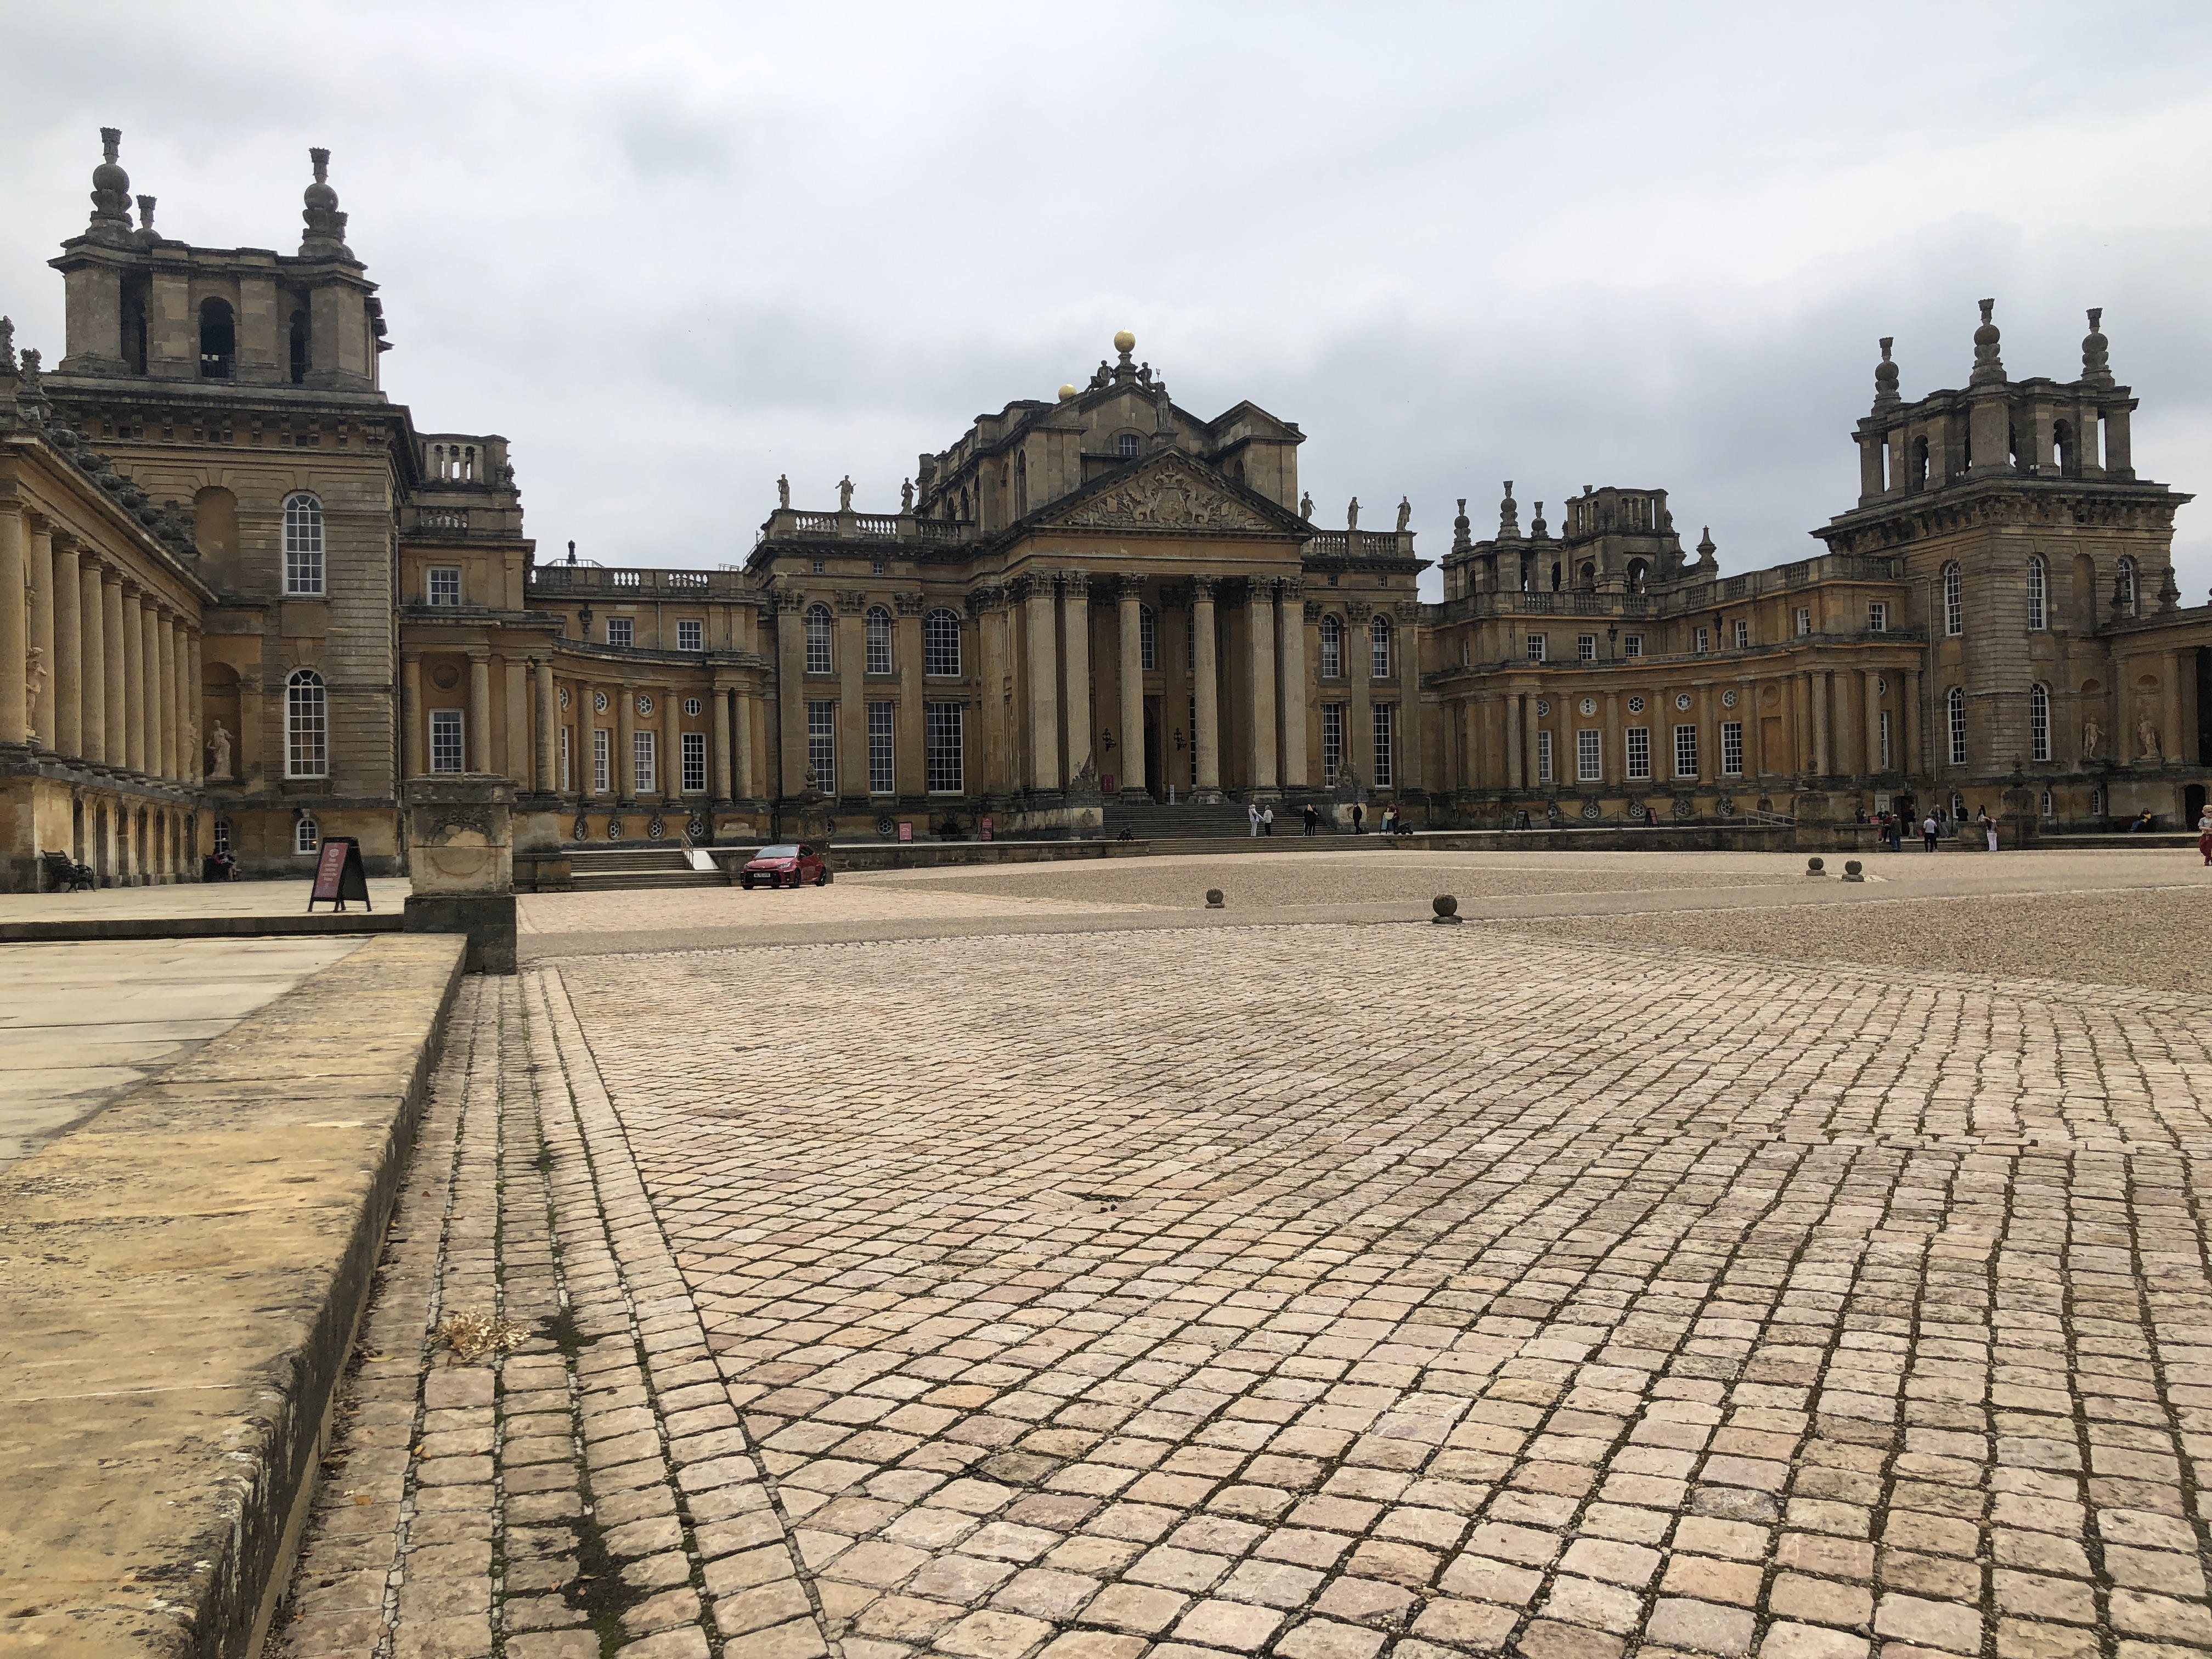 Blenheim Palace one of England's largest houses was built between 1705 and 1722